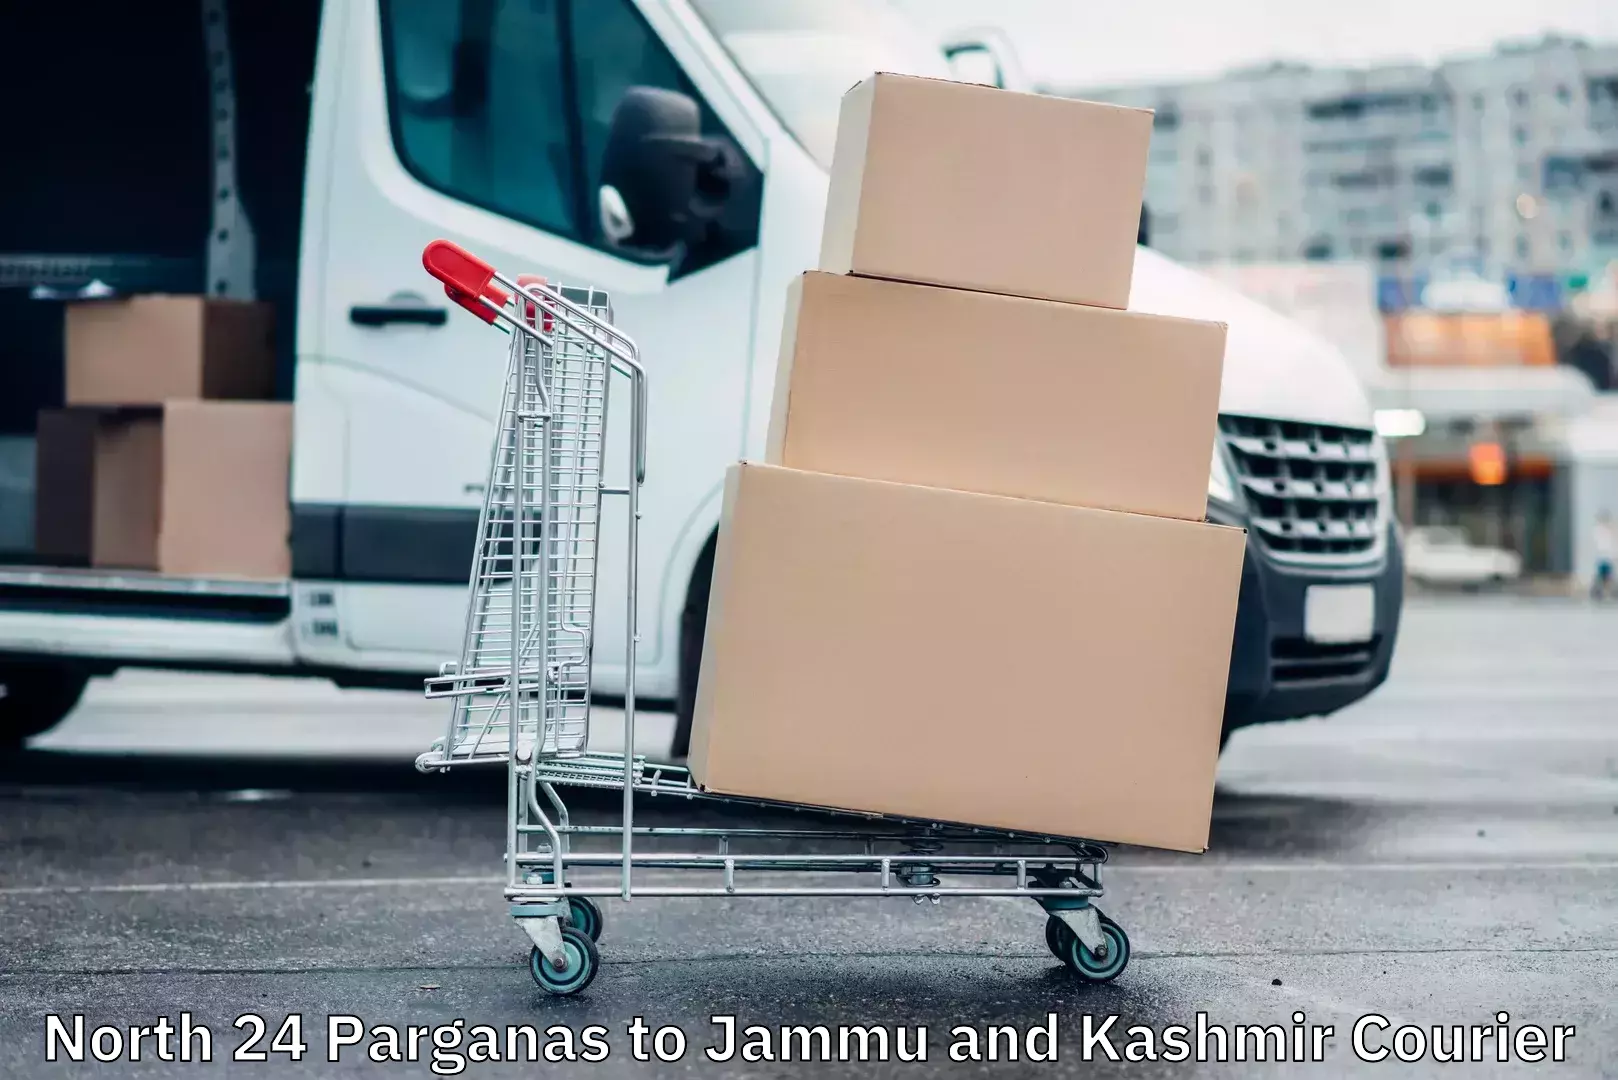 Global courier networks North 24 Parganas to Jammu and Kashmir